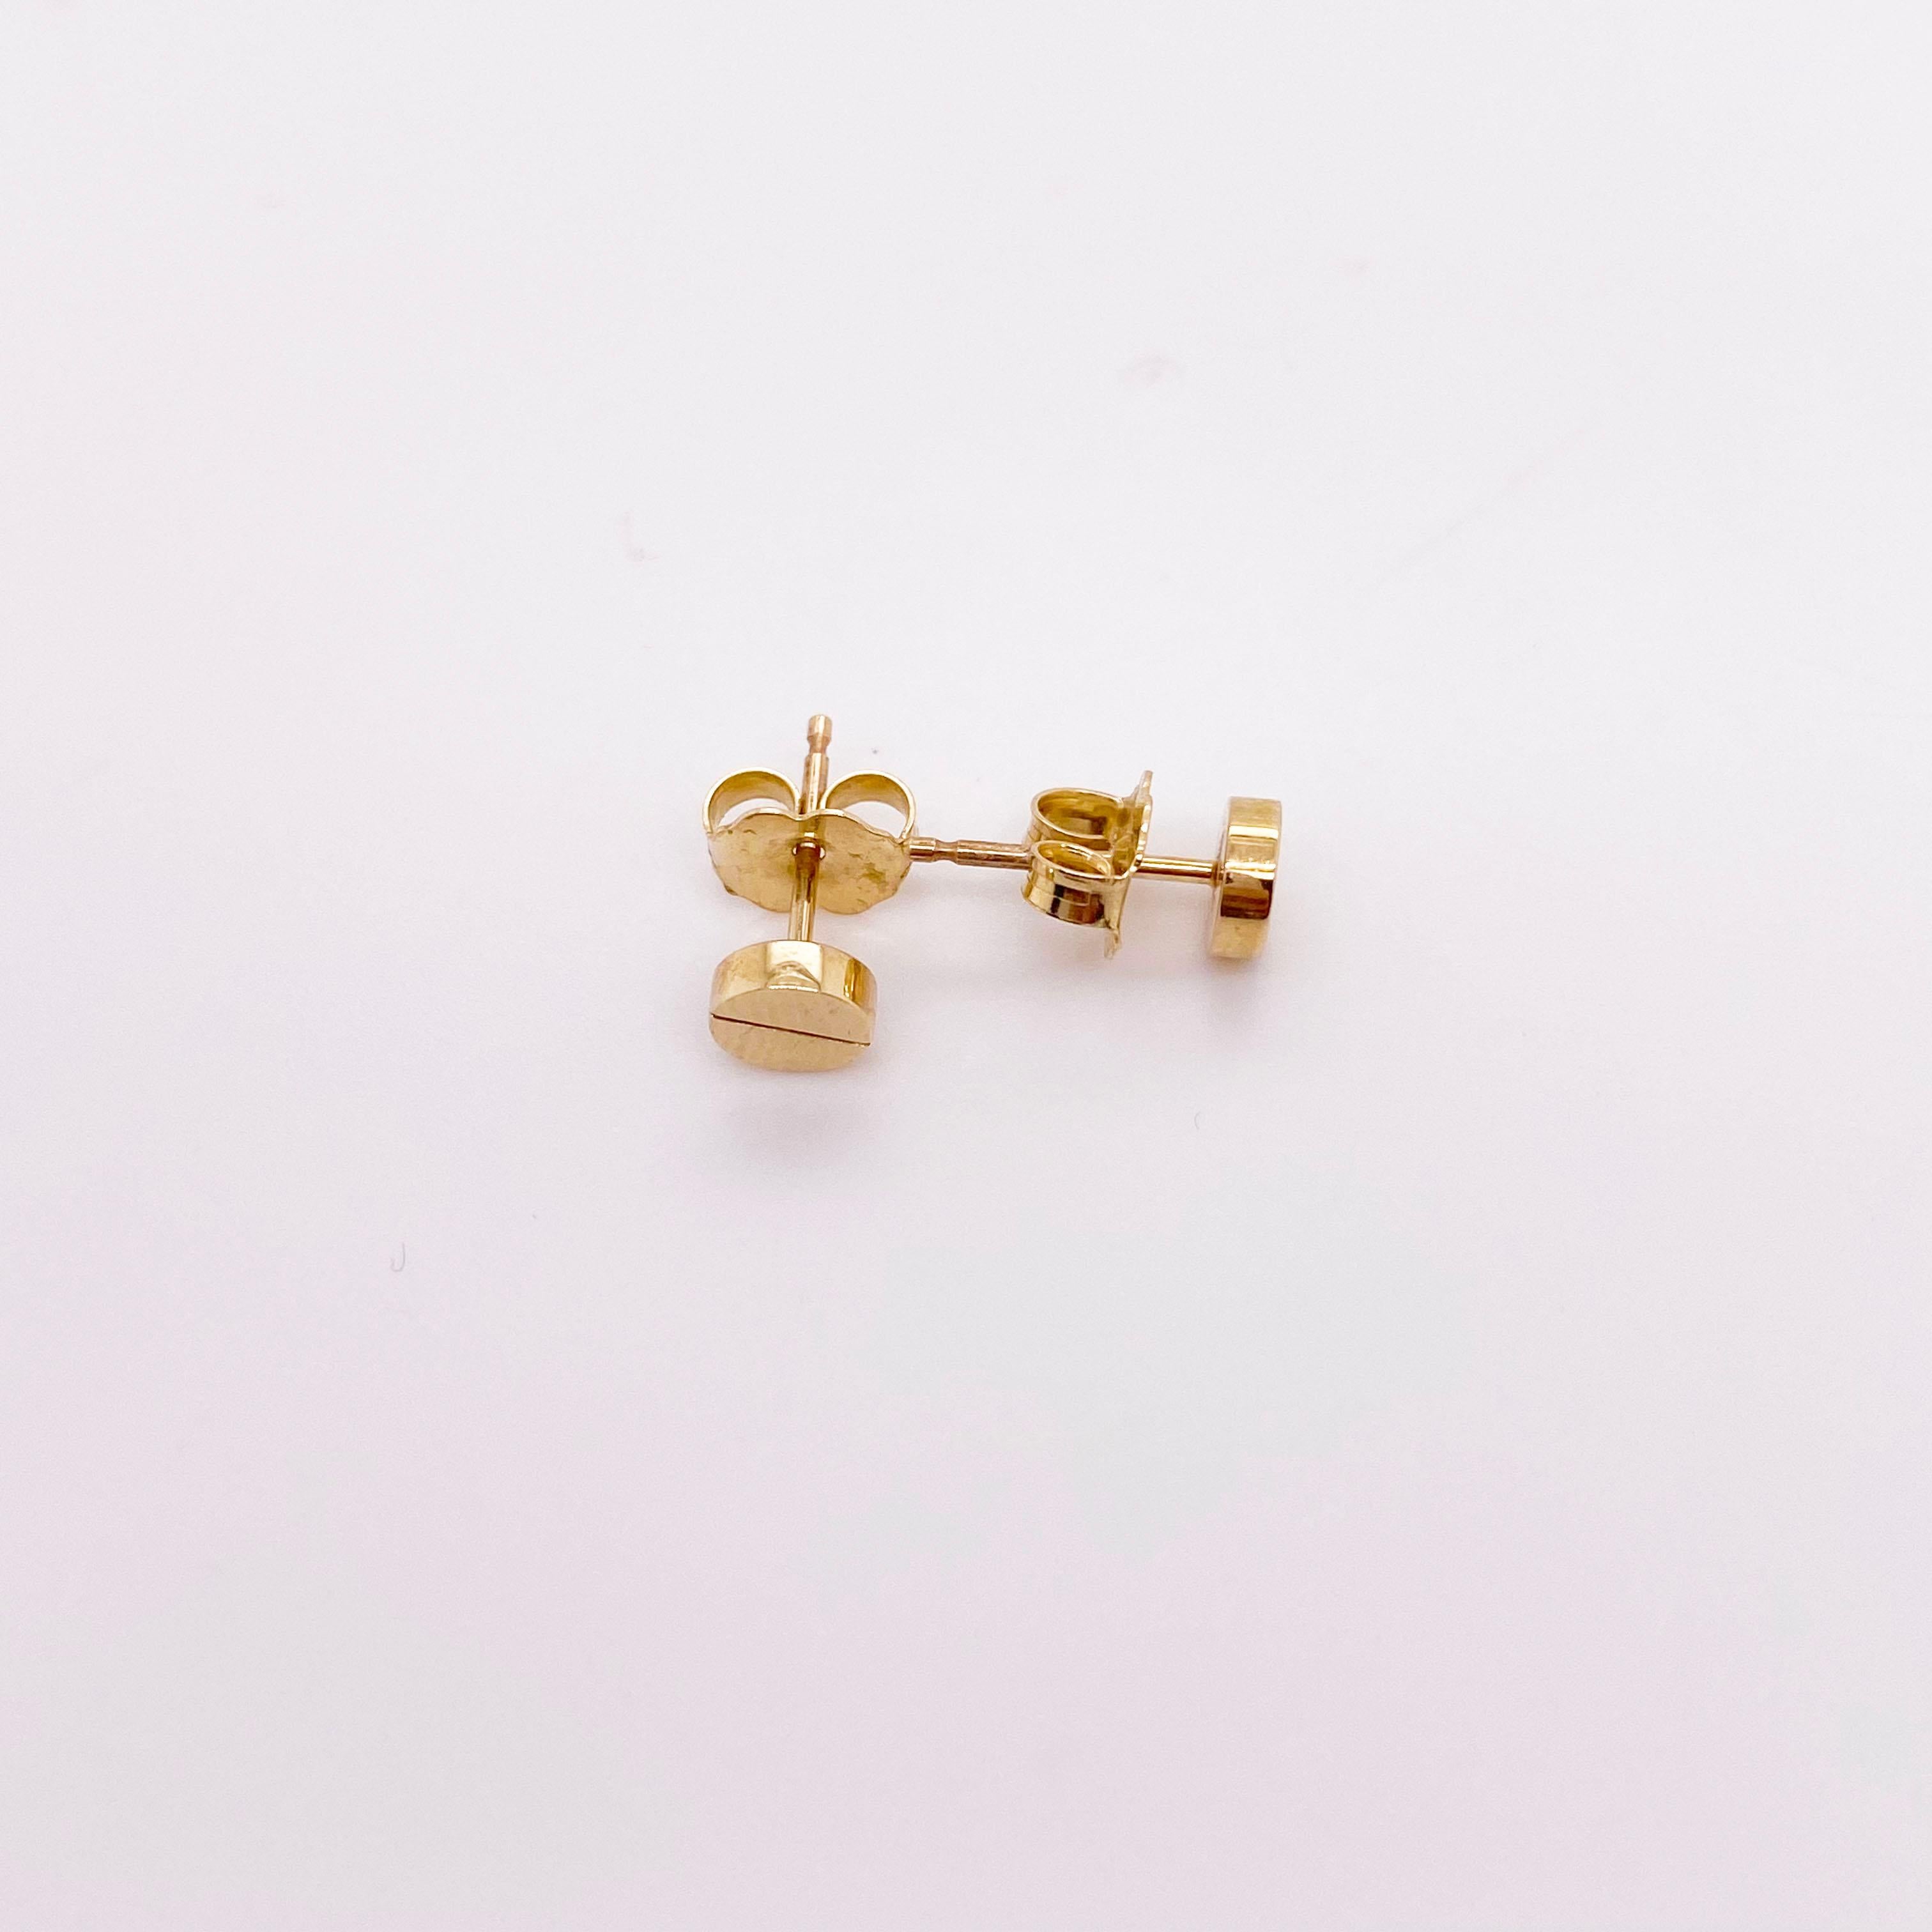 Ultra modern gold stud earrings. Round shape with line going through the center, looks great by themselves or stacked with other minimalist earrings. The details for these gorgeous earrings are listed below:
Metal Quality: 14 kt Yellow Gold
Earring